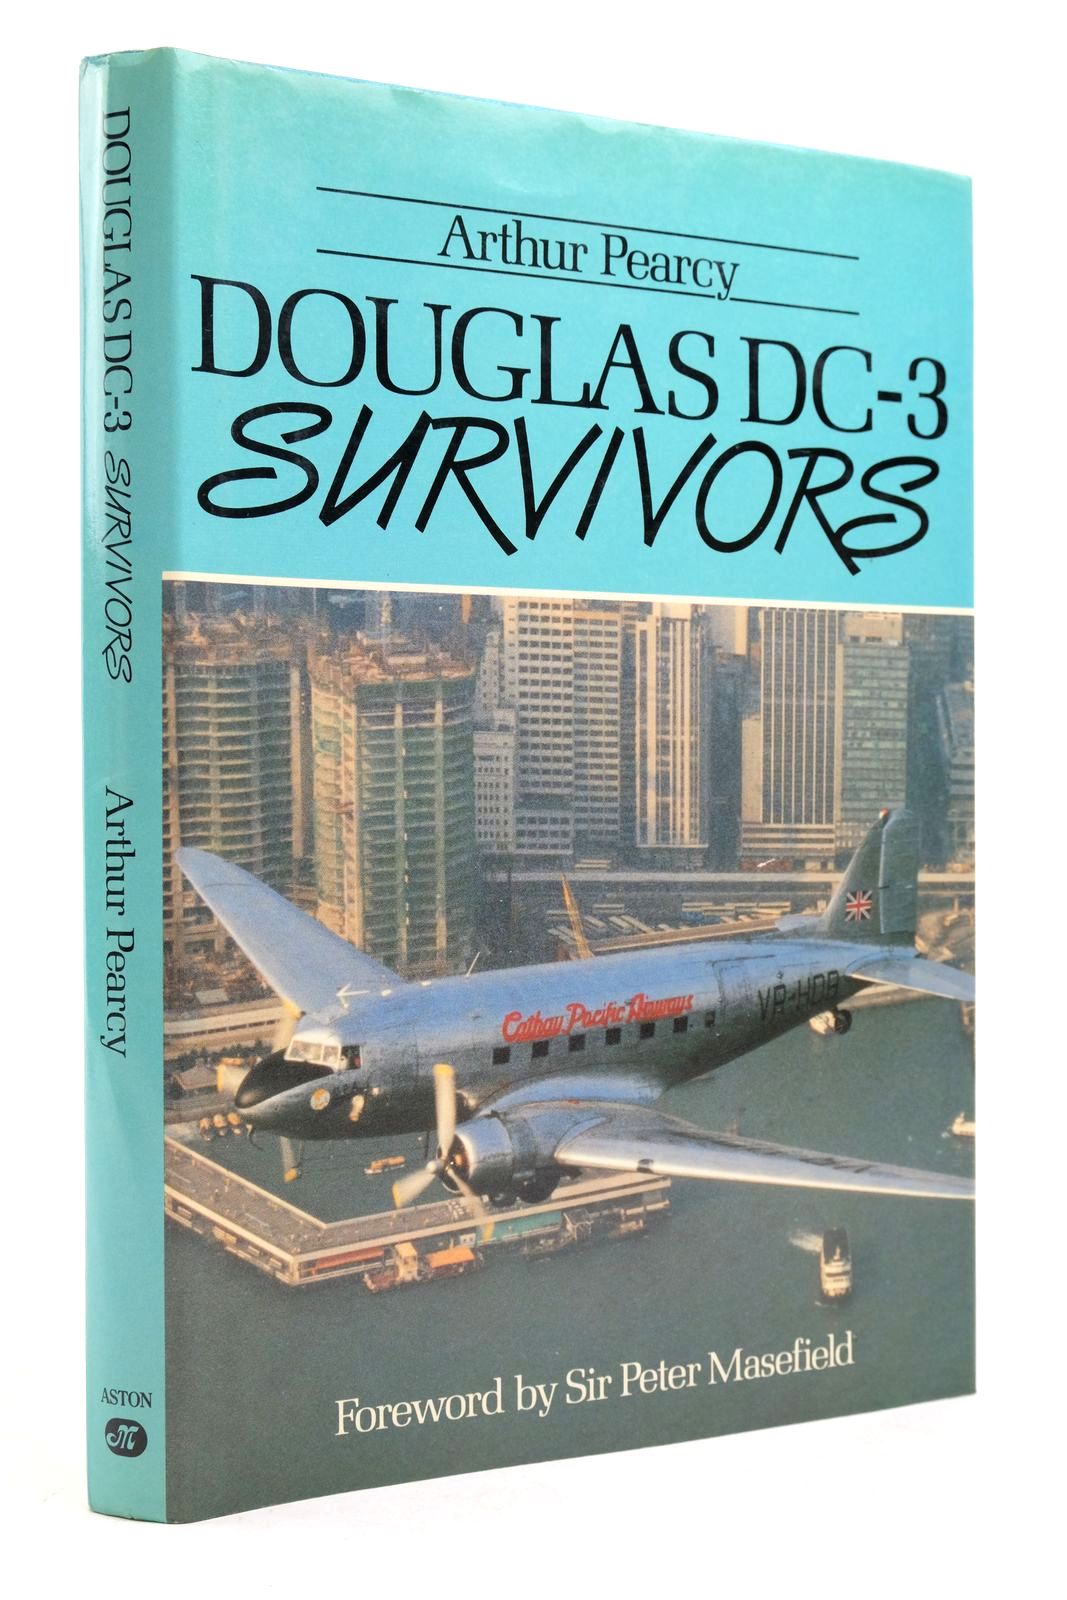 Photo of DOUGLAS DC-3 SURVIVORS VOLUME ONE written by Pearcy, Arthur published by Aston Publications (STOCK CODE: 2139145)  for sale by Stella & Rose's Books